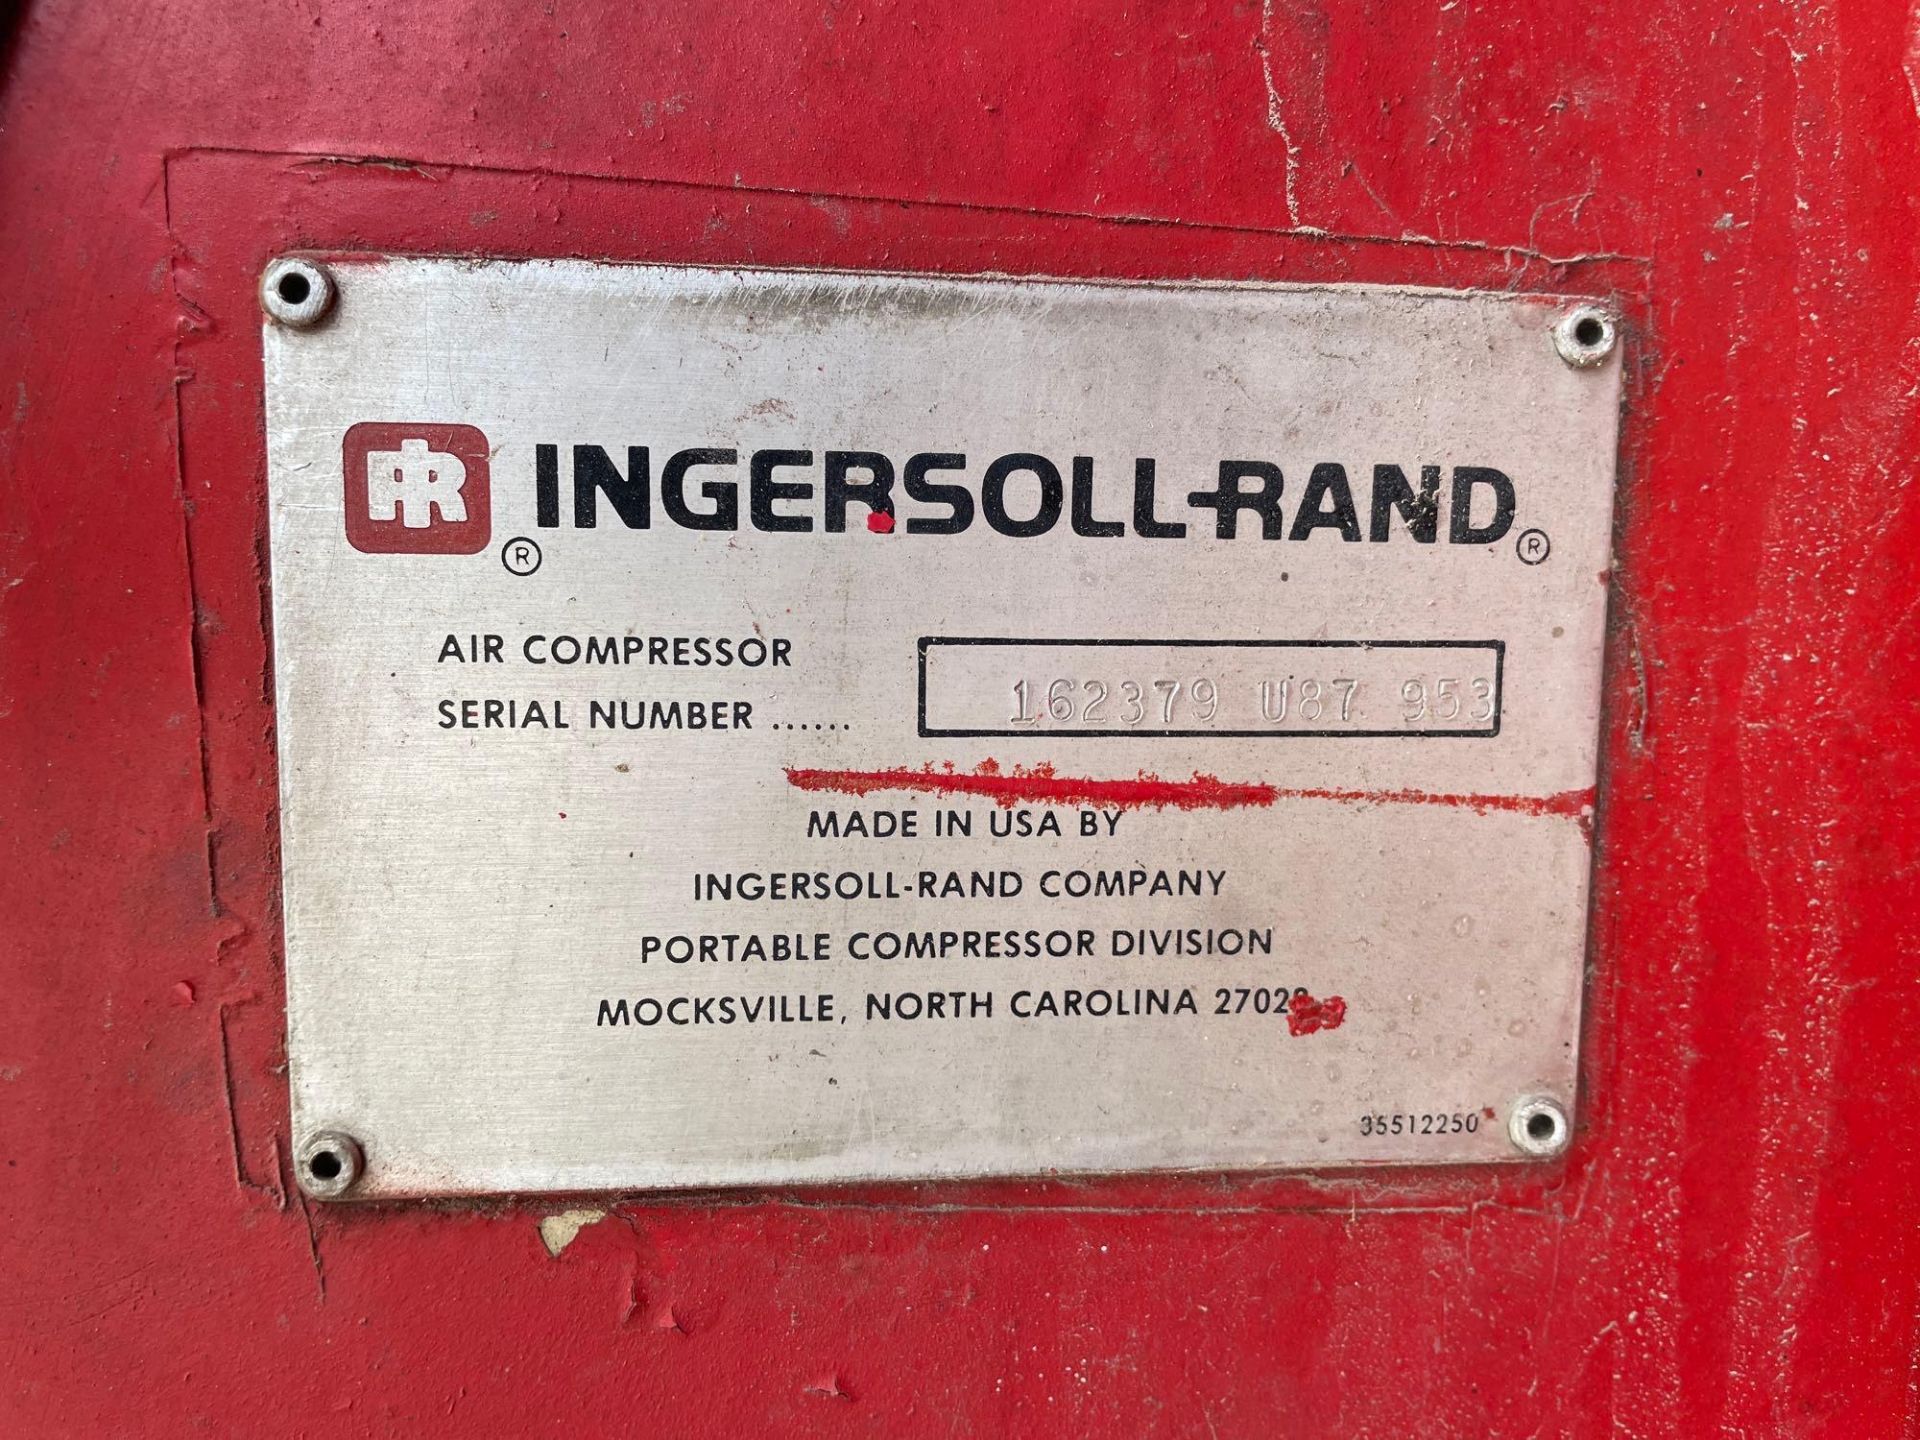 Ingersoll Rand Portable Air Compressor with Diesel Engine - Image 9 of 17